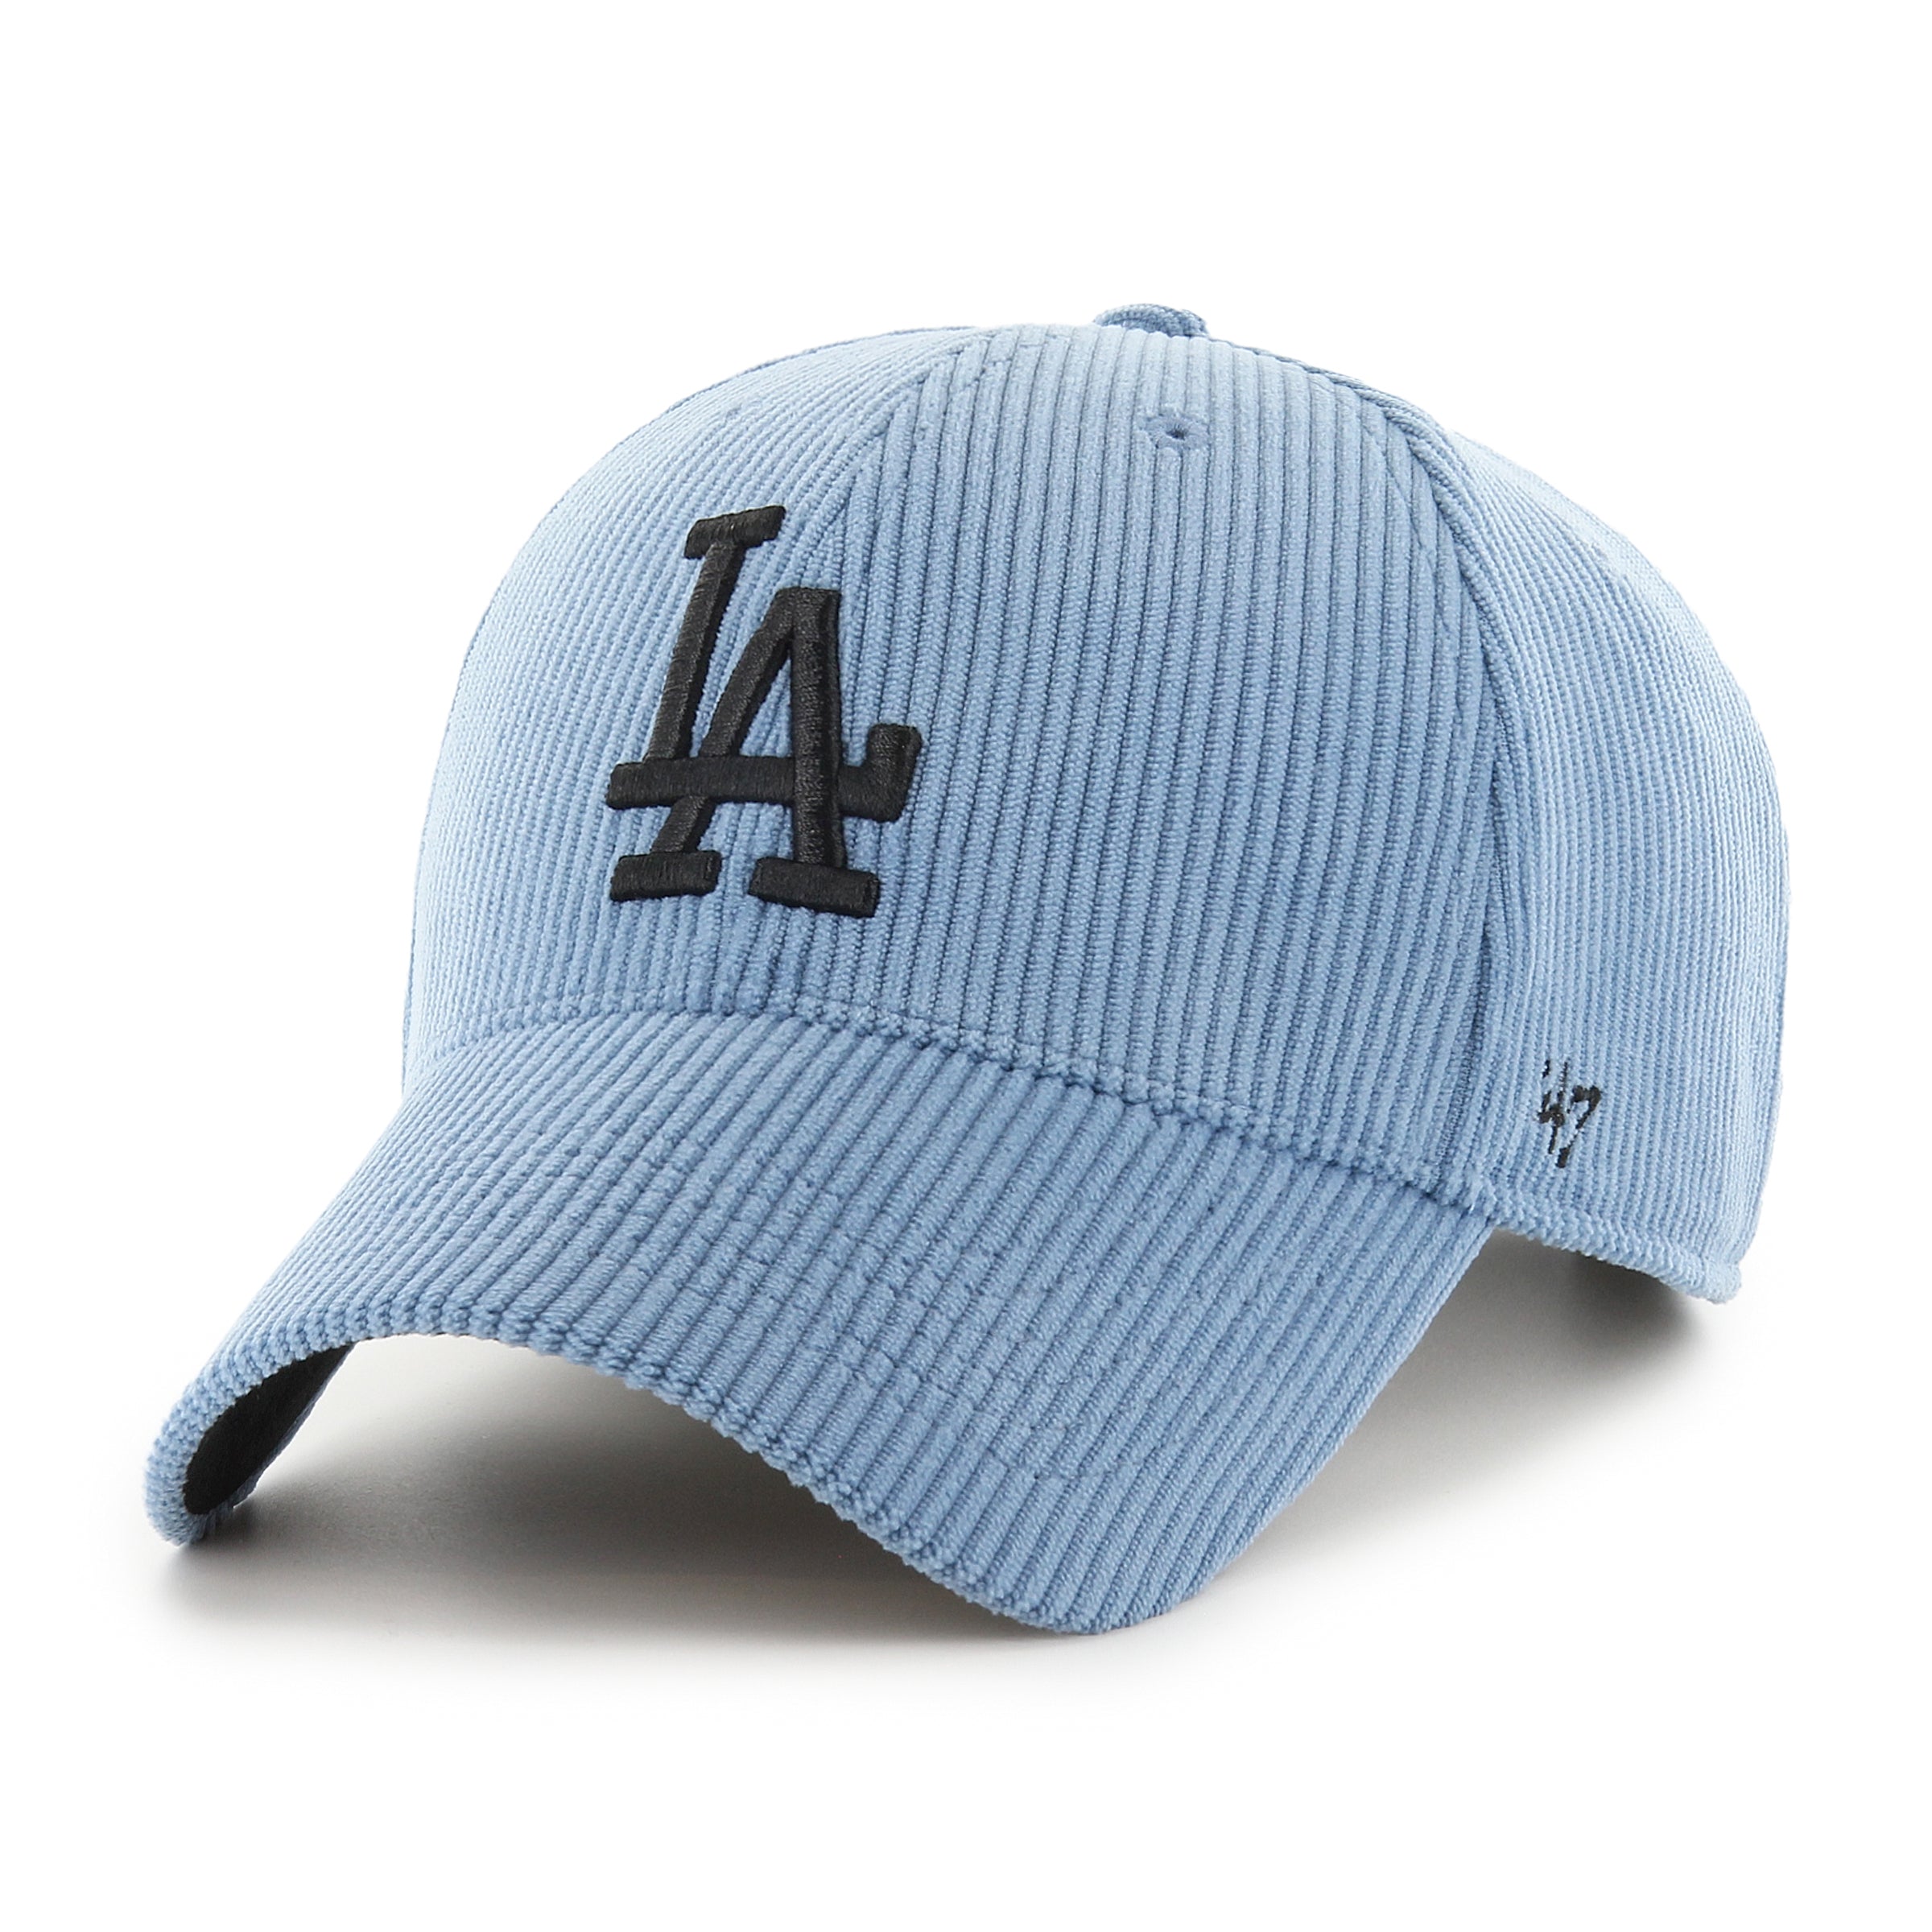 Los Angeles Dodgers Embroidery design files